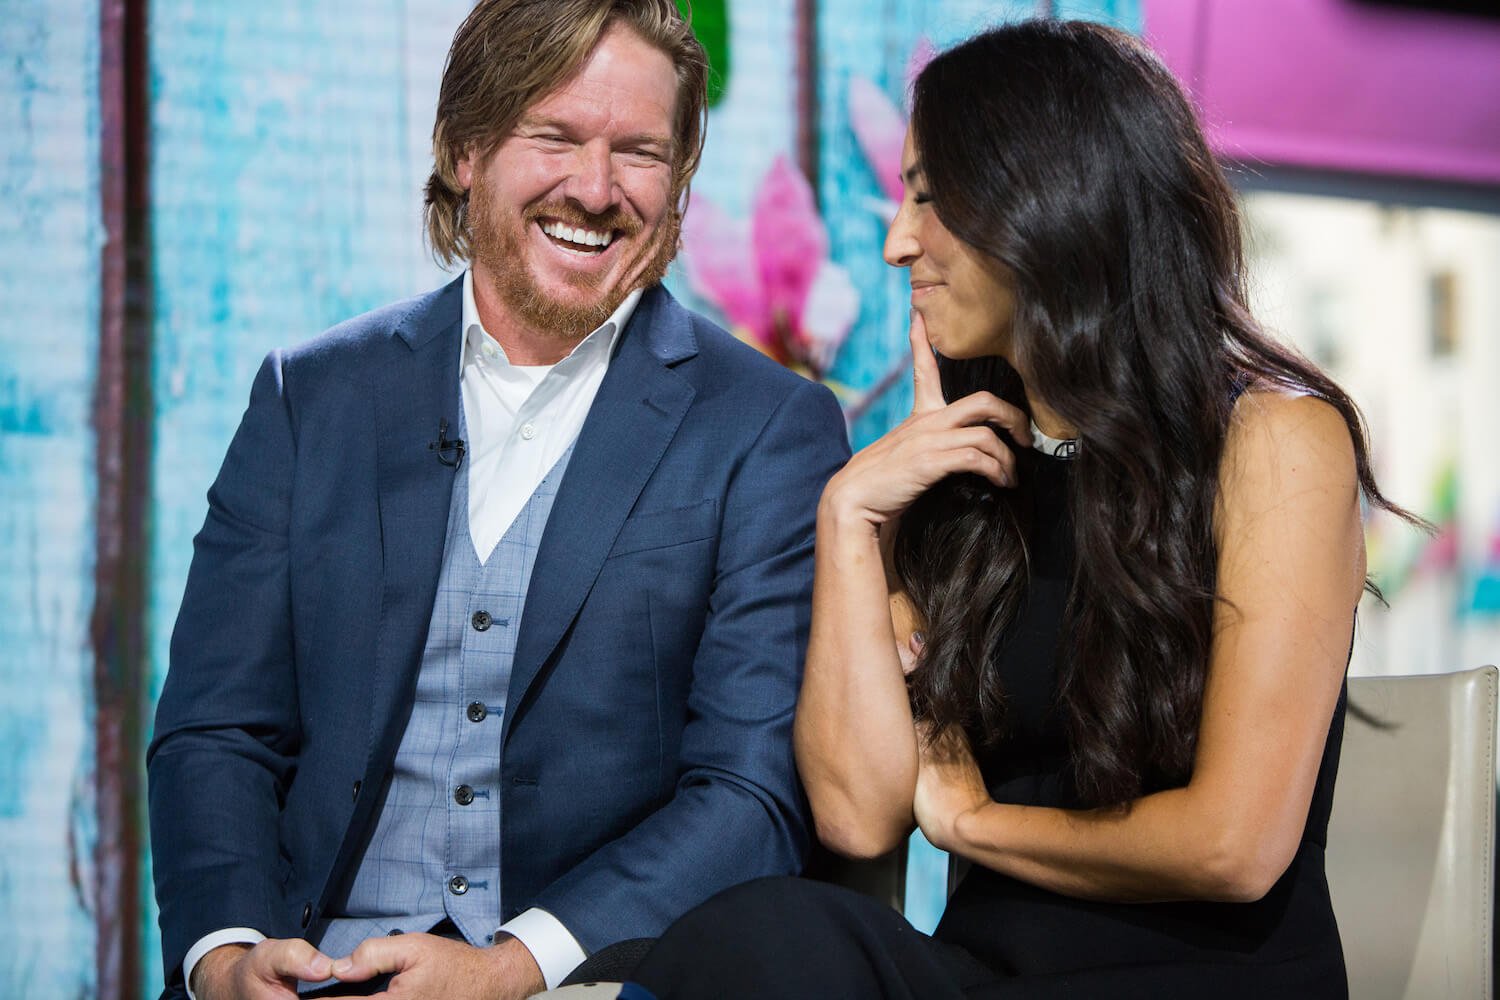 Chip and Joanna Gaines from 'Fixer Upper' sitting next to each other laughing during an interview